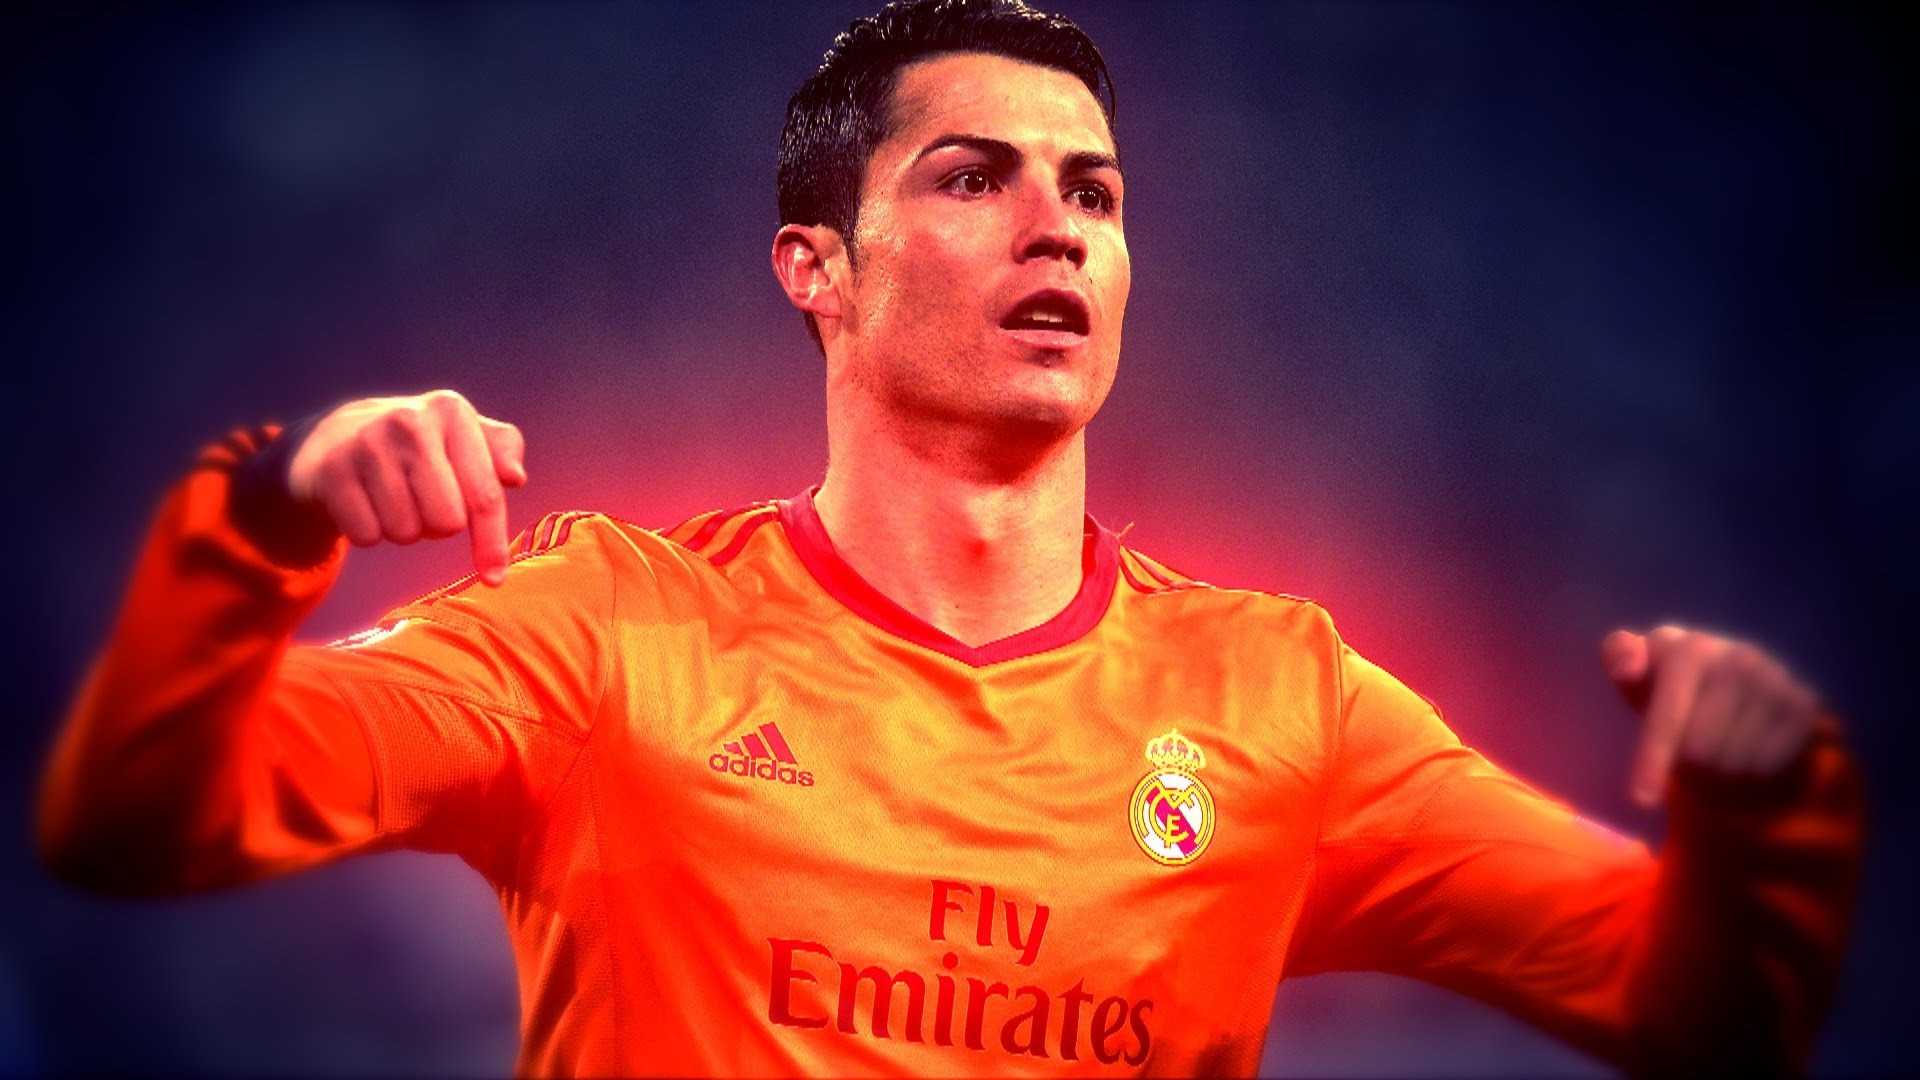 1920x1080 Collection of Ronaldo Wallpapers on HDWallpapers 1080Ã675 Cristiano Ronaldo  Wallpaper Hd (61 Wallpapers